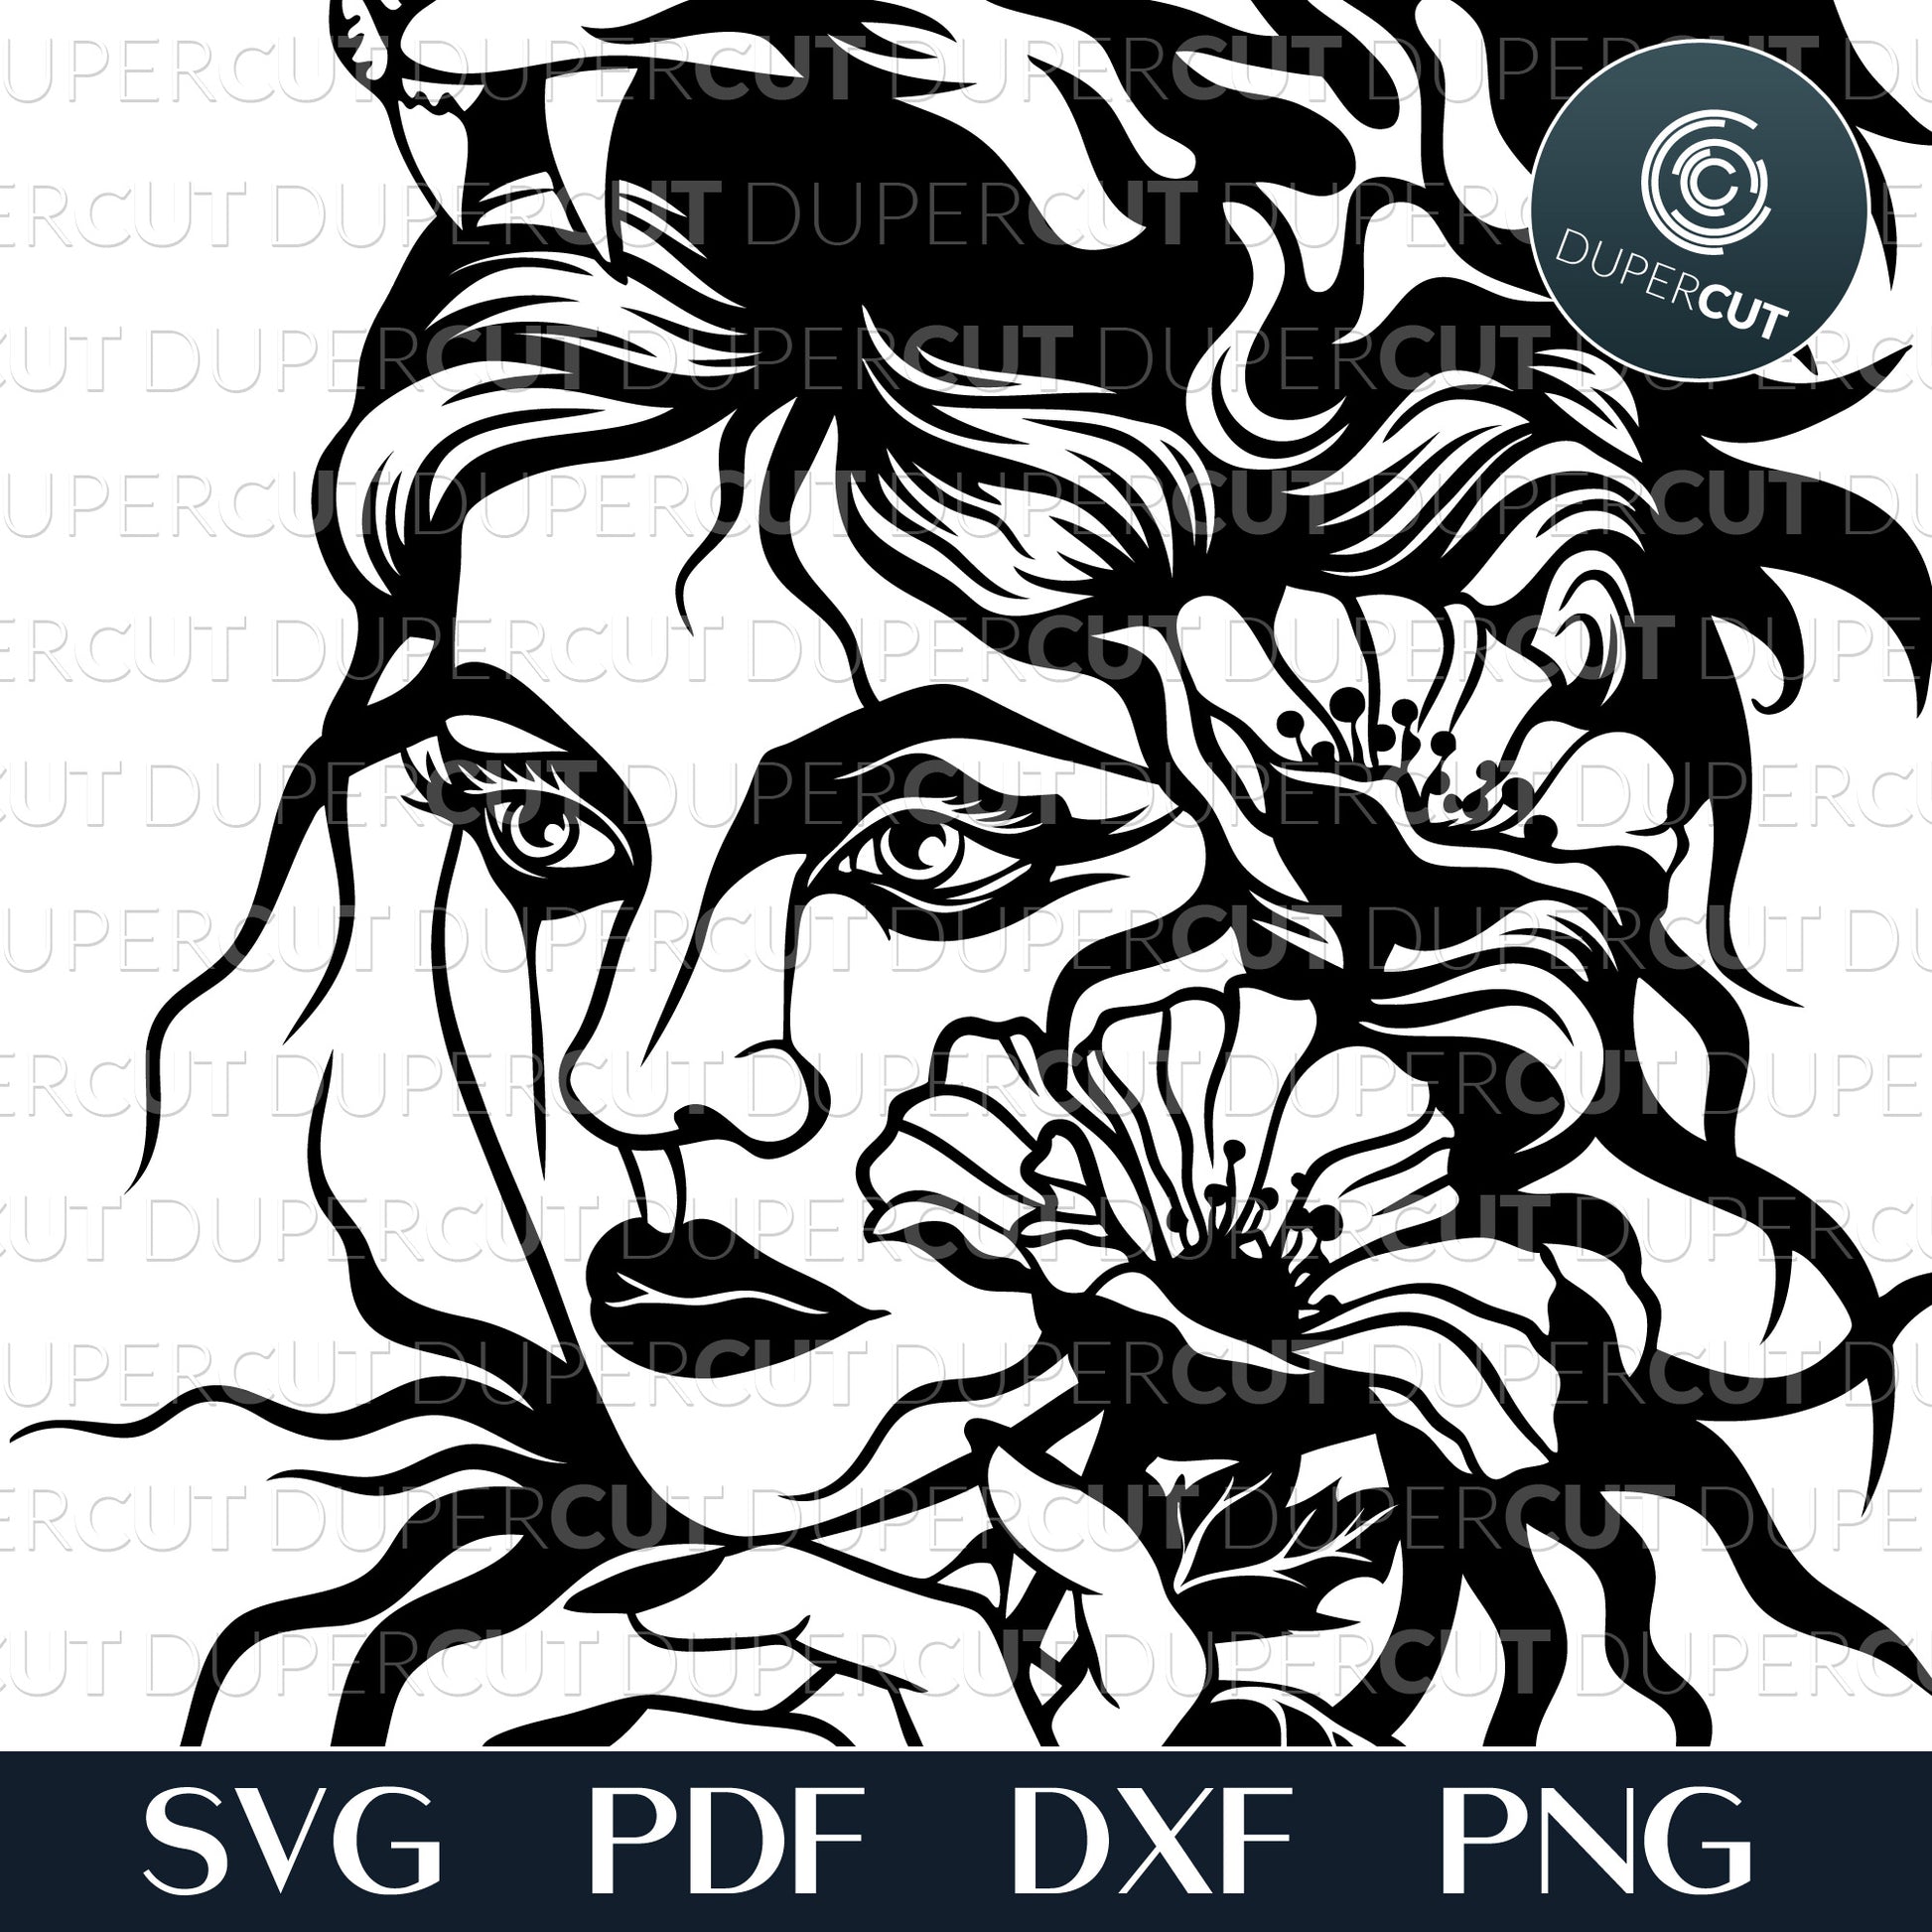 Woman with Tiger headdress, vector illustration.. Paper cutting template SVG PNG DXF files. For DIY projects Cricut, Glowforge, Silhouette Cameo, CNC Machines.